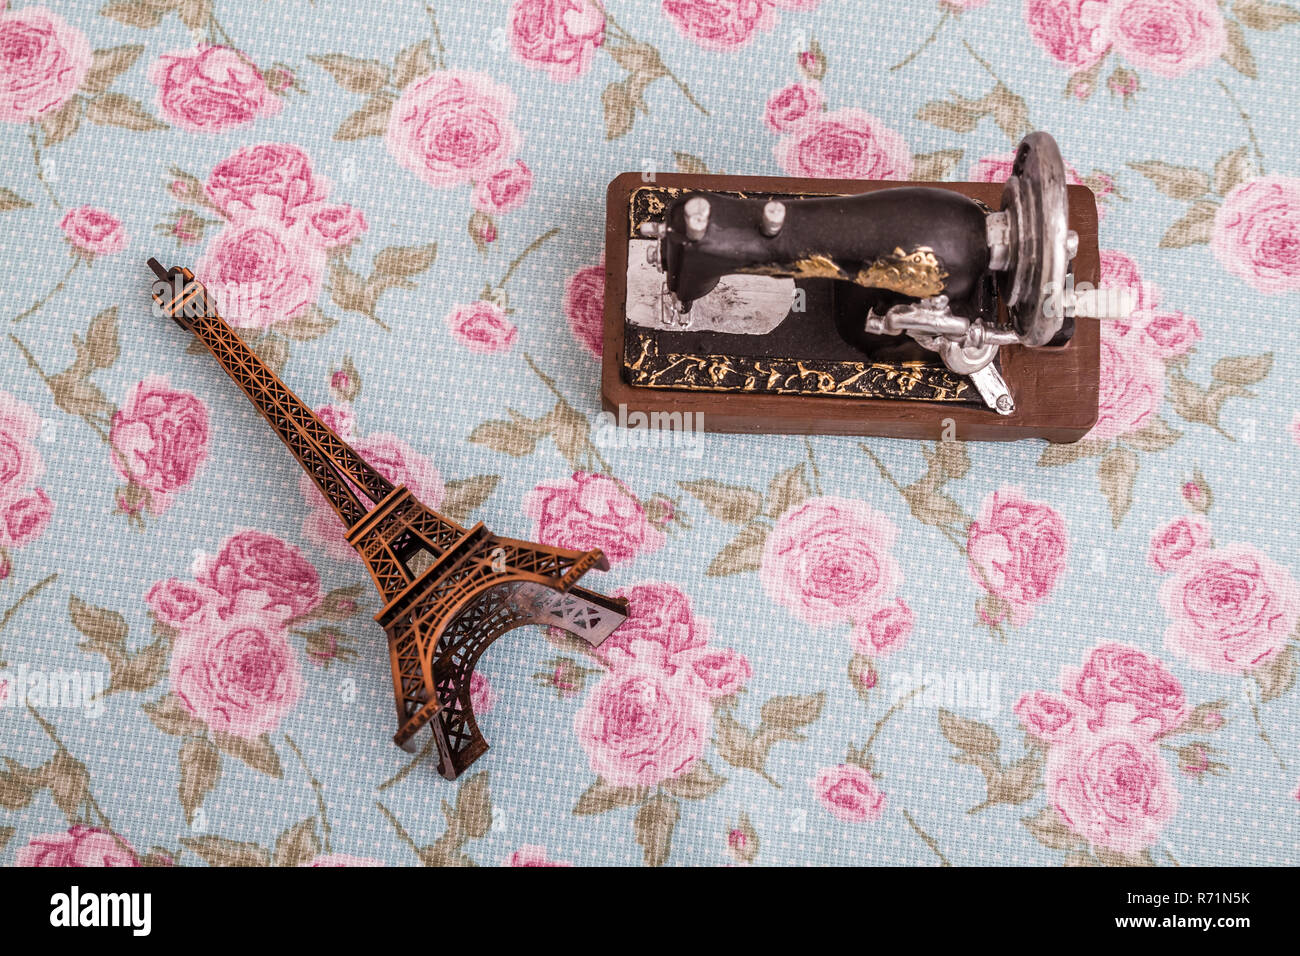 Statue Model of Eiffel Tower and Sewing Machine on Floral Background Stock Photo